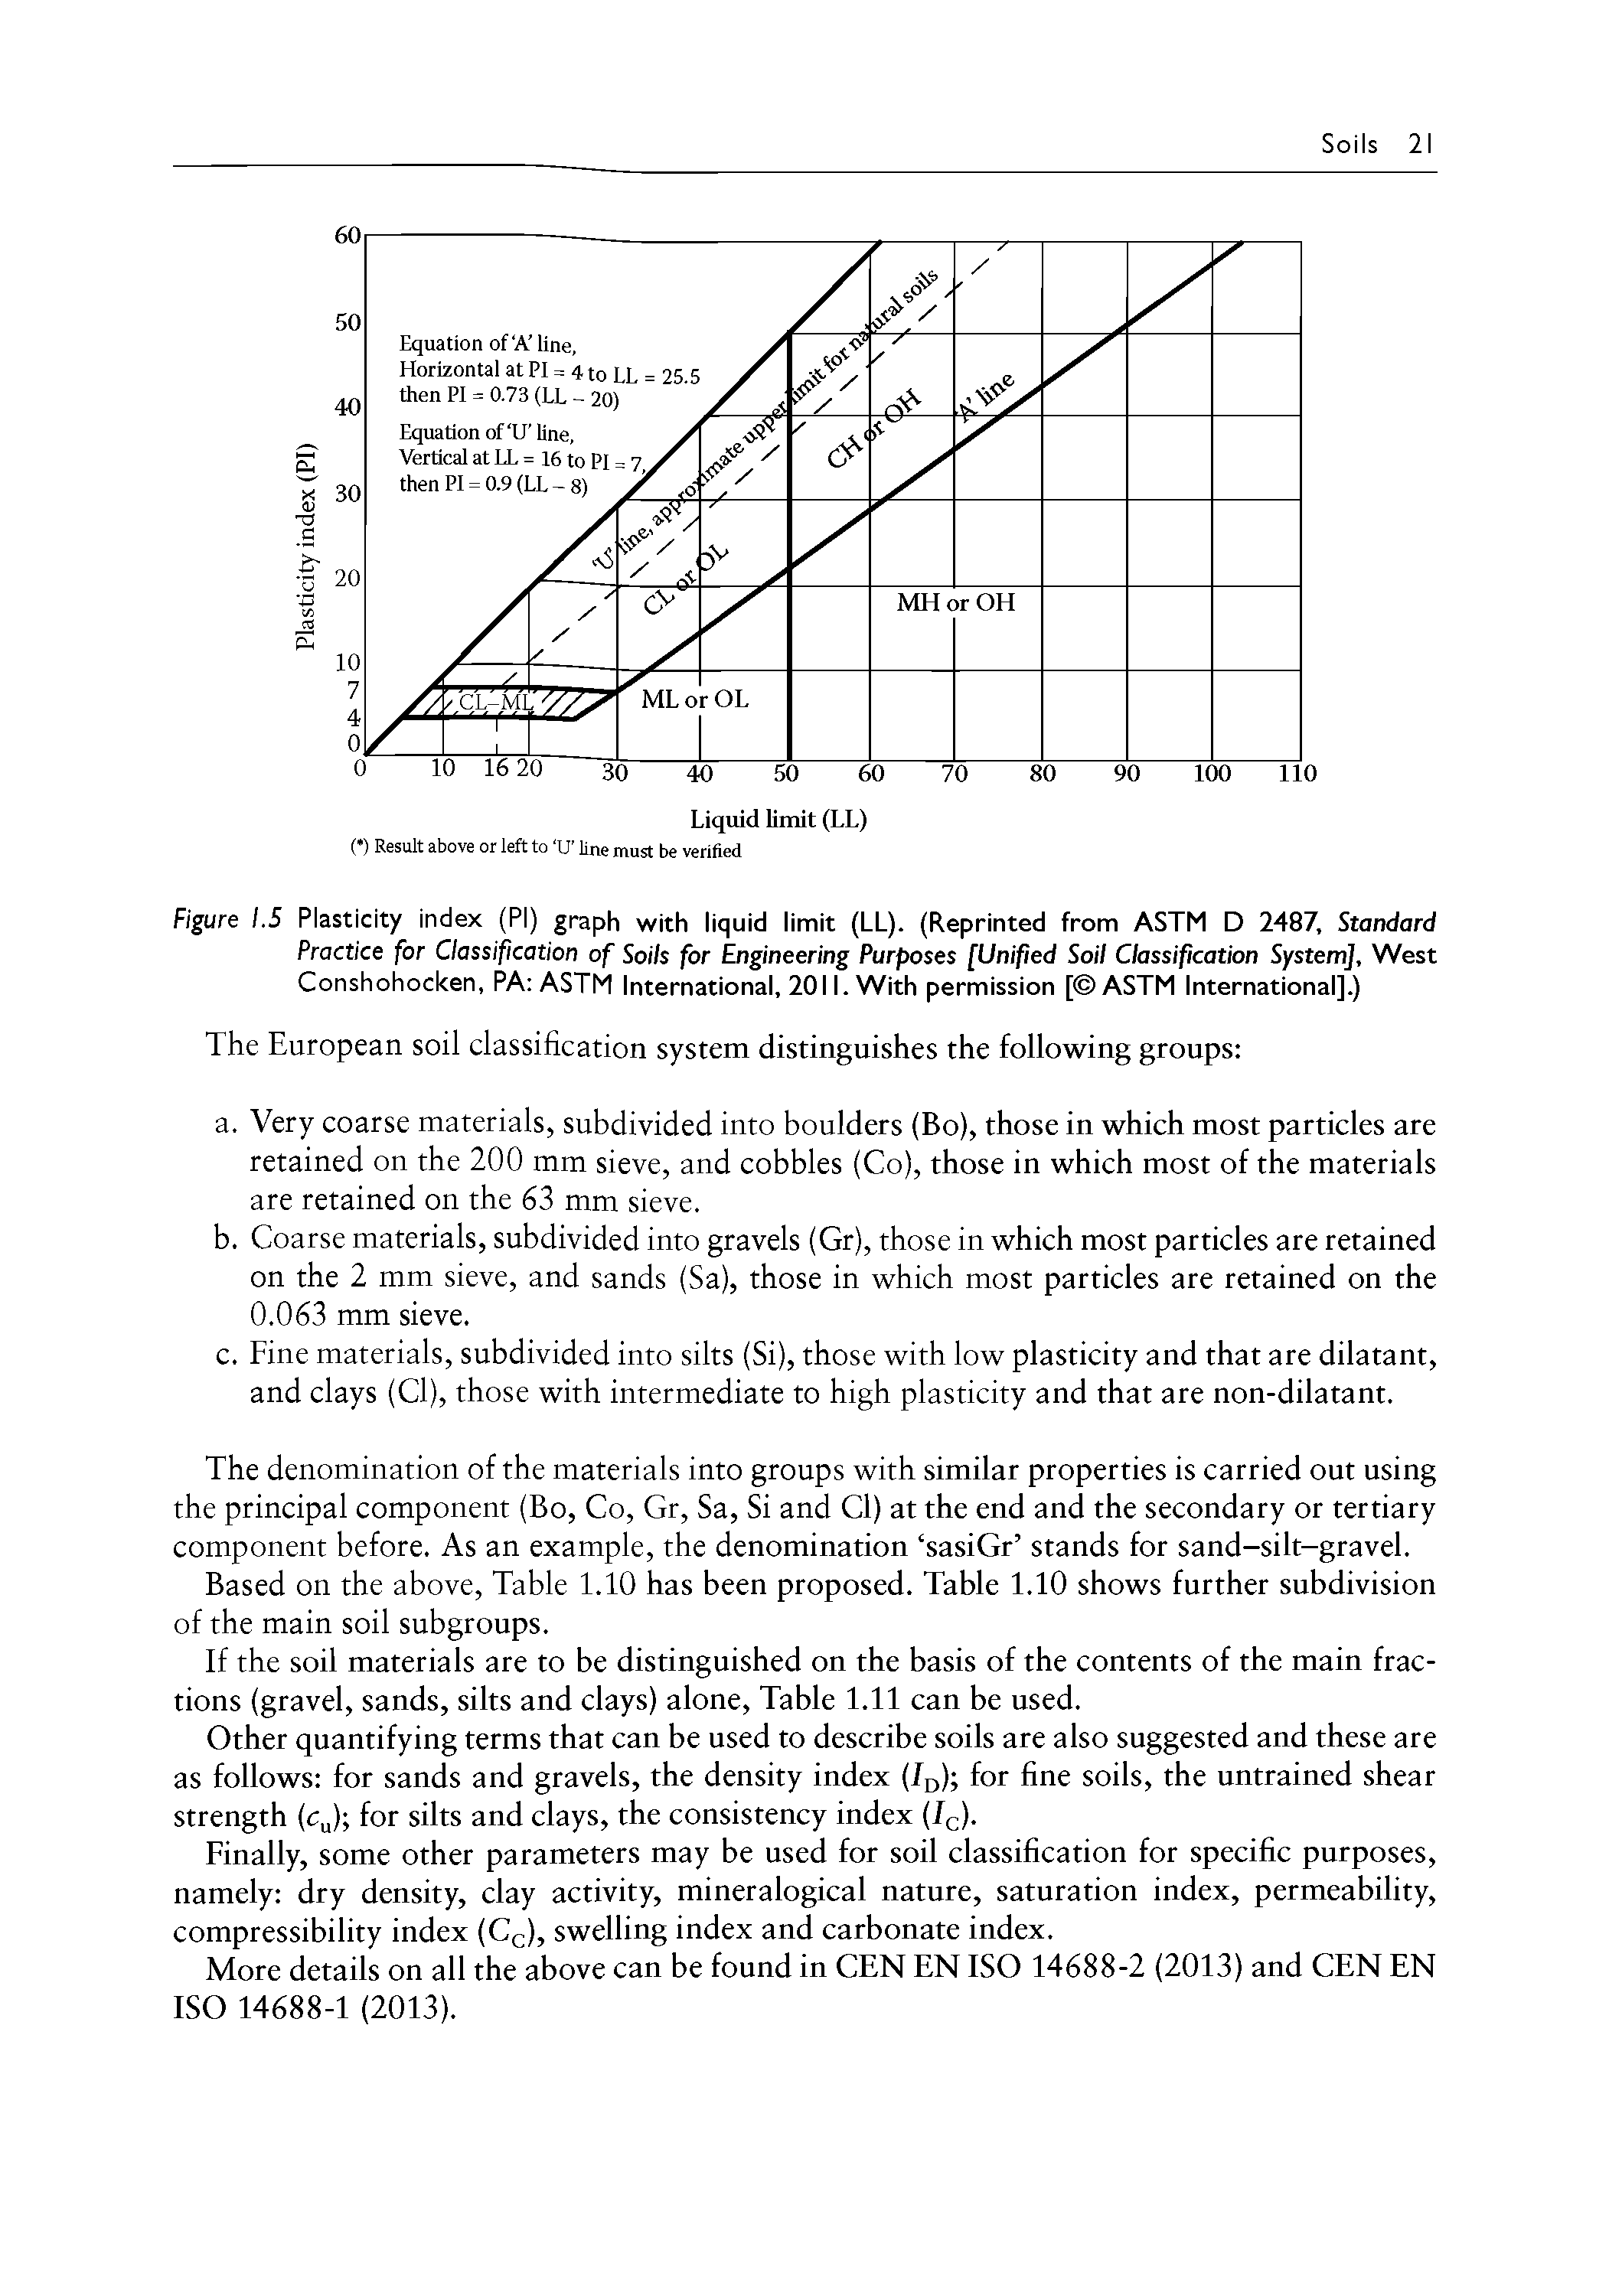 Figure 1.5 Plasticity index (PI) graph with liquid limit (LL). (Reprinted from ASTM D 2487, Standard Practice for Classification of Soils for Engineering Purposes [Unified Soil Classification System], West Conshohocken, PA ASTM International, 2011. With permission [ ASTM International].)...